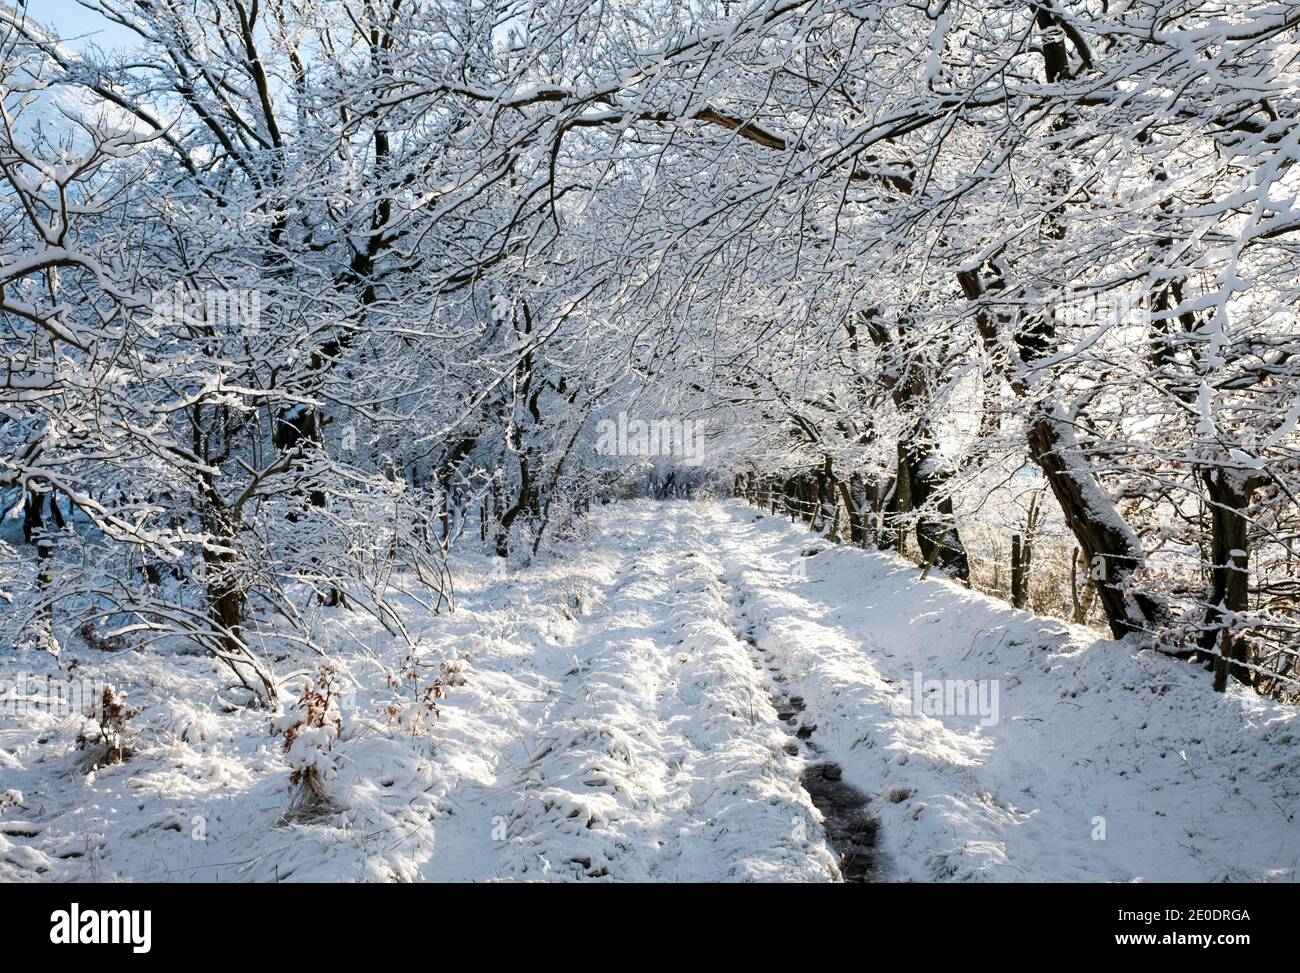 Morning walk through an avenue of trees after an overnight fall of snowfall, West Lothian, Scotland. Stock Photo